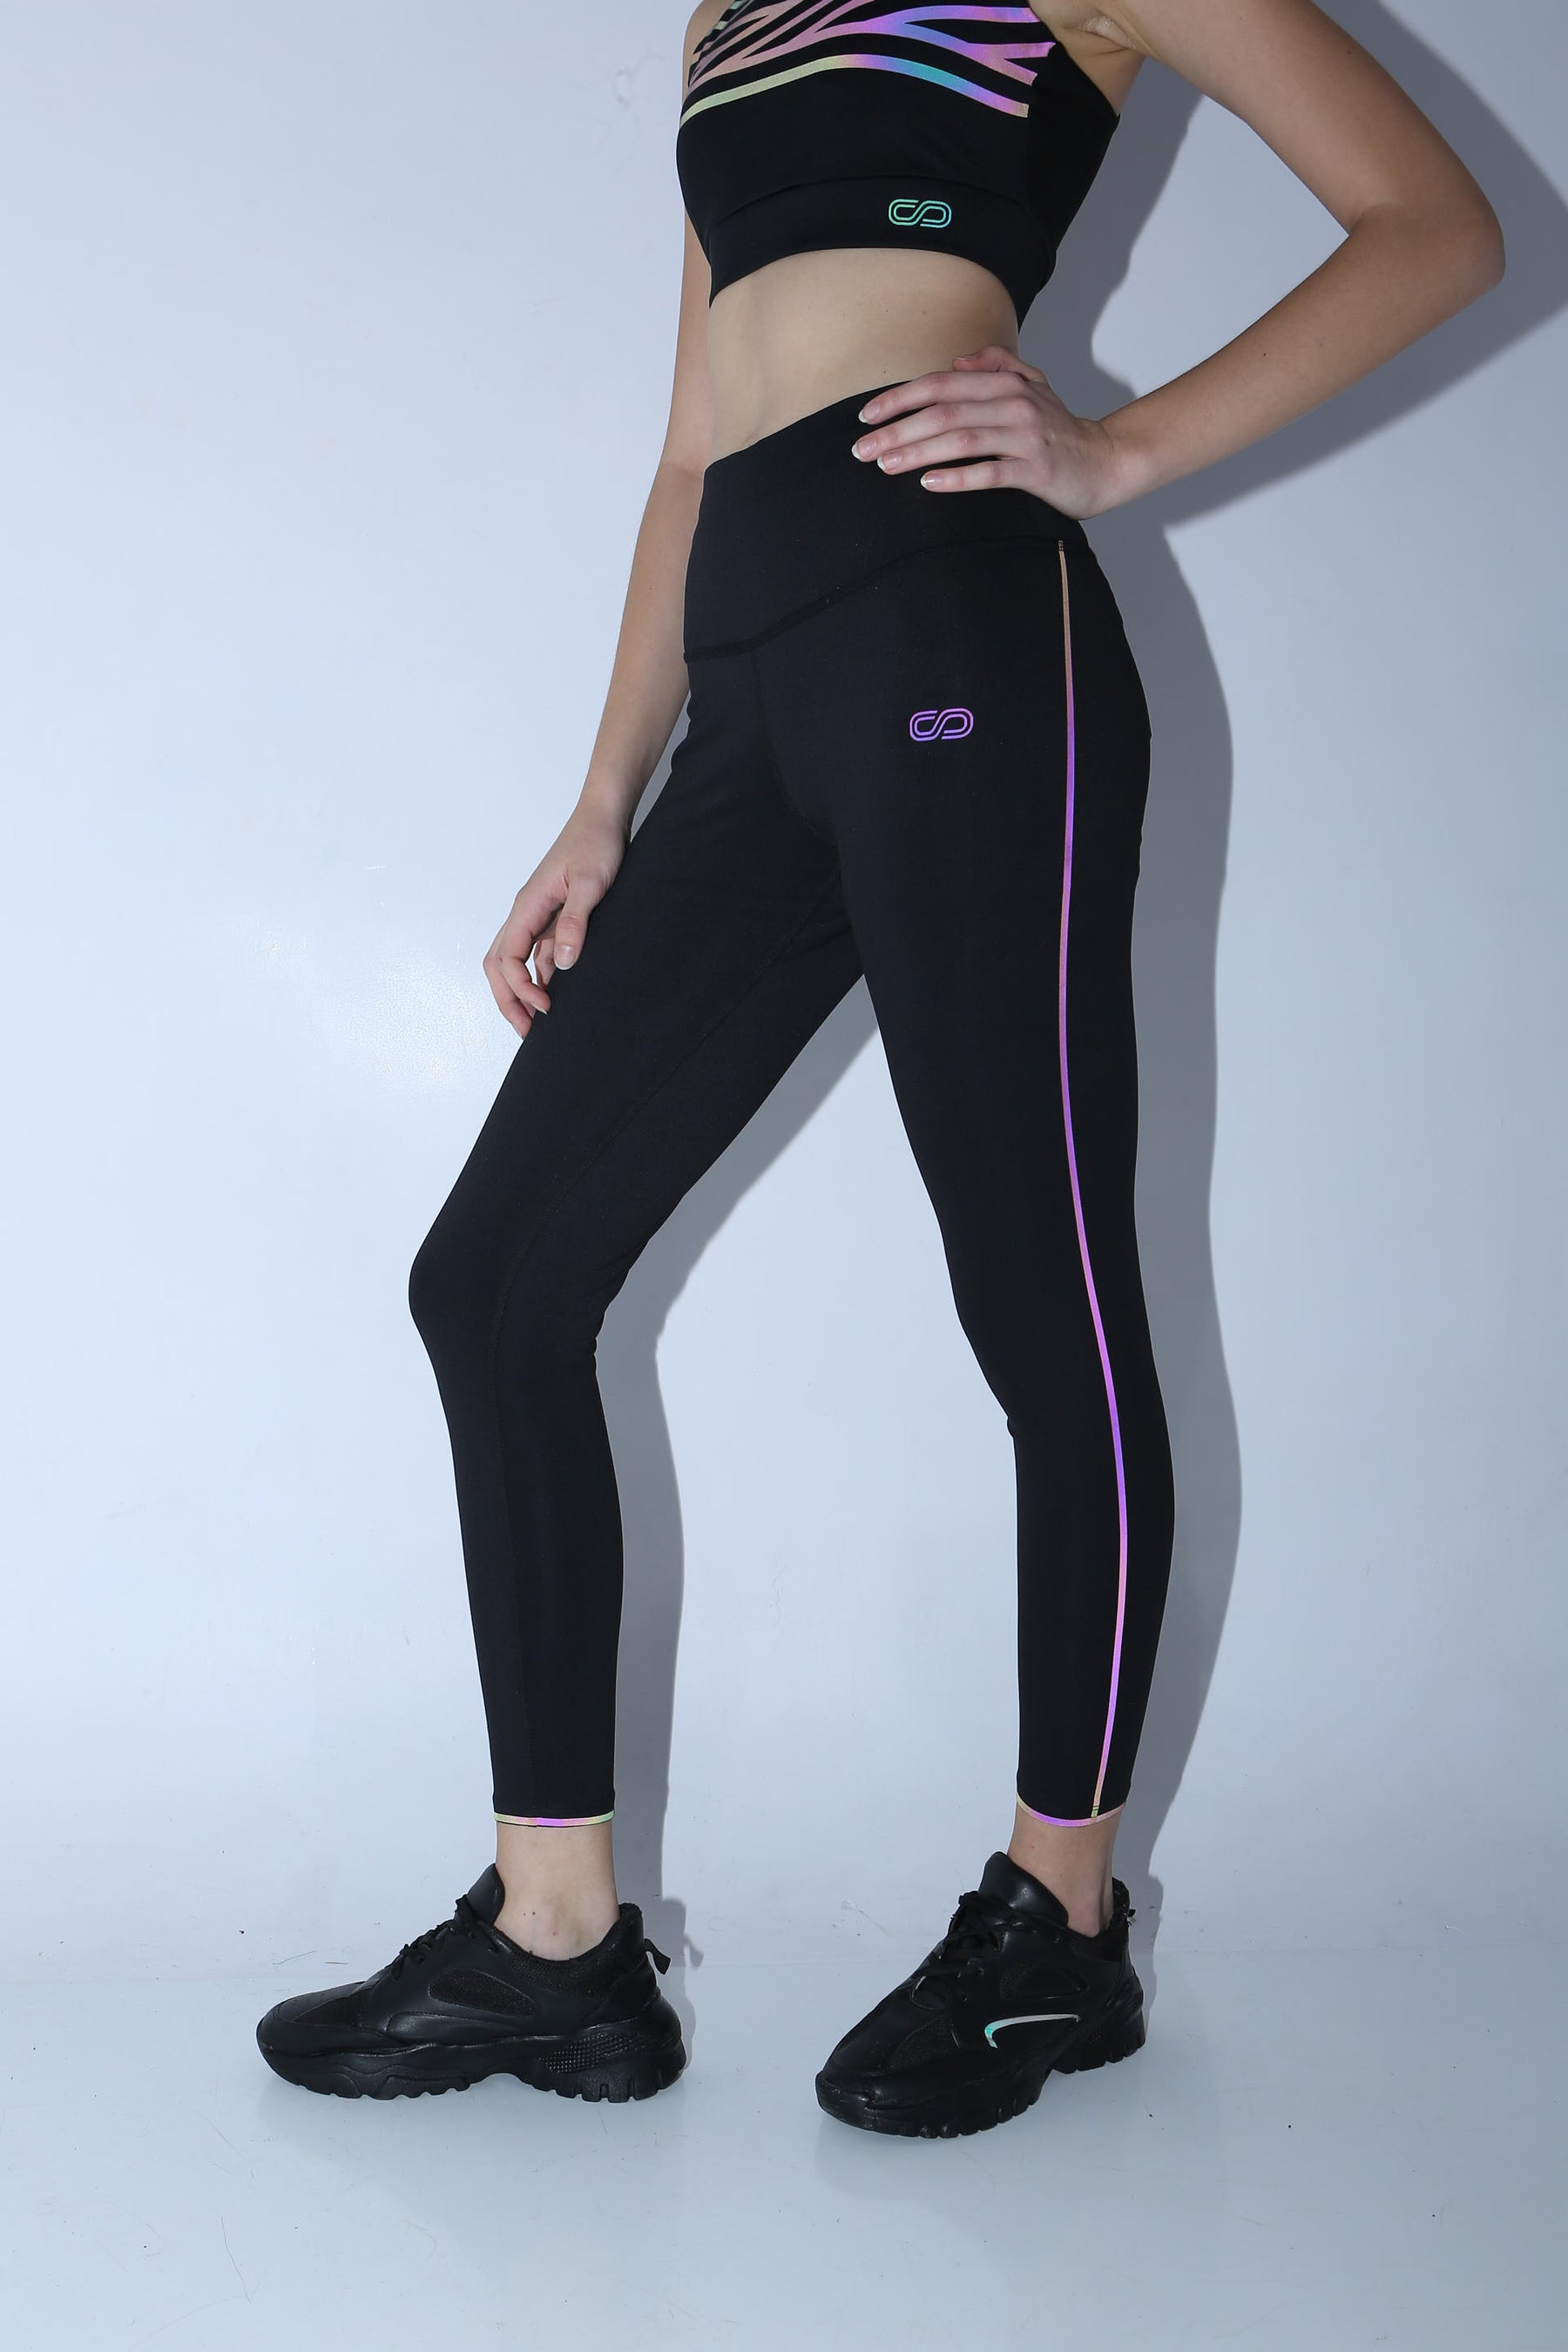 Qualiance International Pvt. Ltd. - Silvertraq Active Wear Check www. silvertraq.com Get ready to slay your workout goals in our T-Back + Luxe  Core Training Tights 🤸‍♀️ #Silvertraq #ActiveWear #SweatWicking #QuickDry  #TankTop #Shorts #